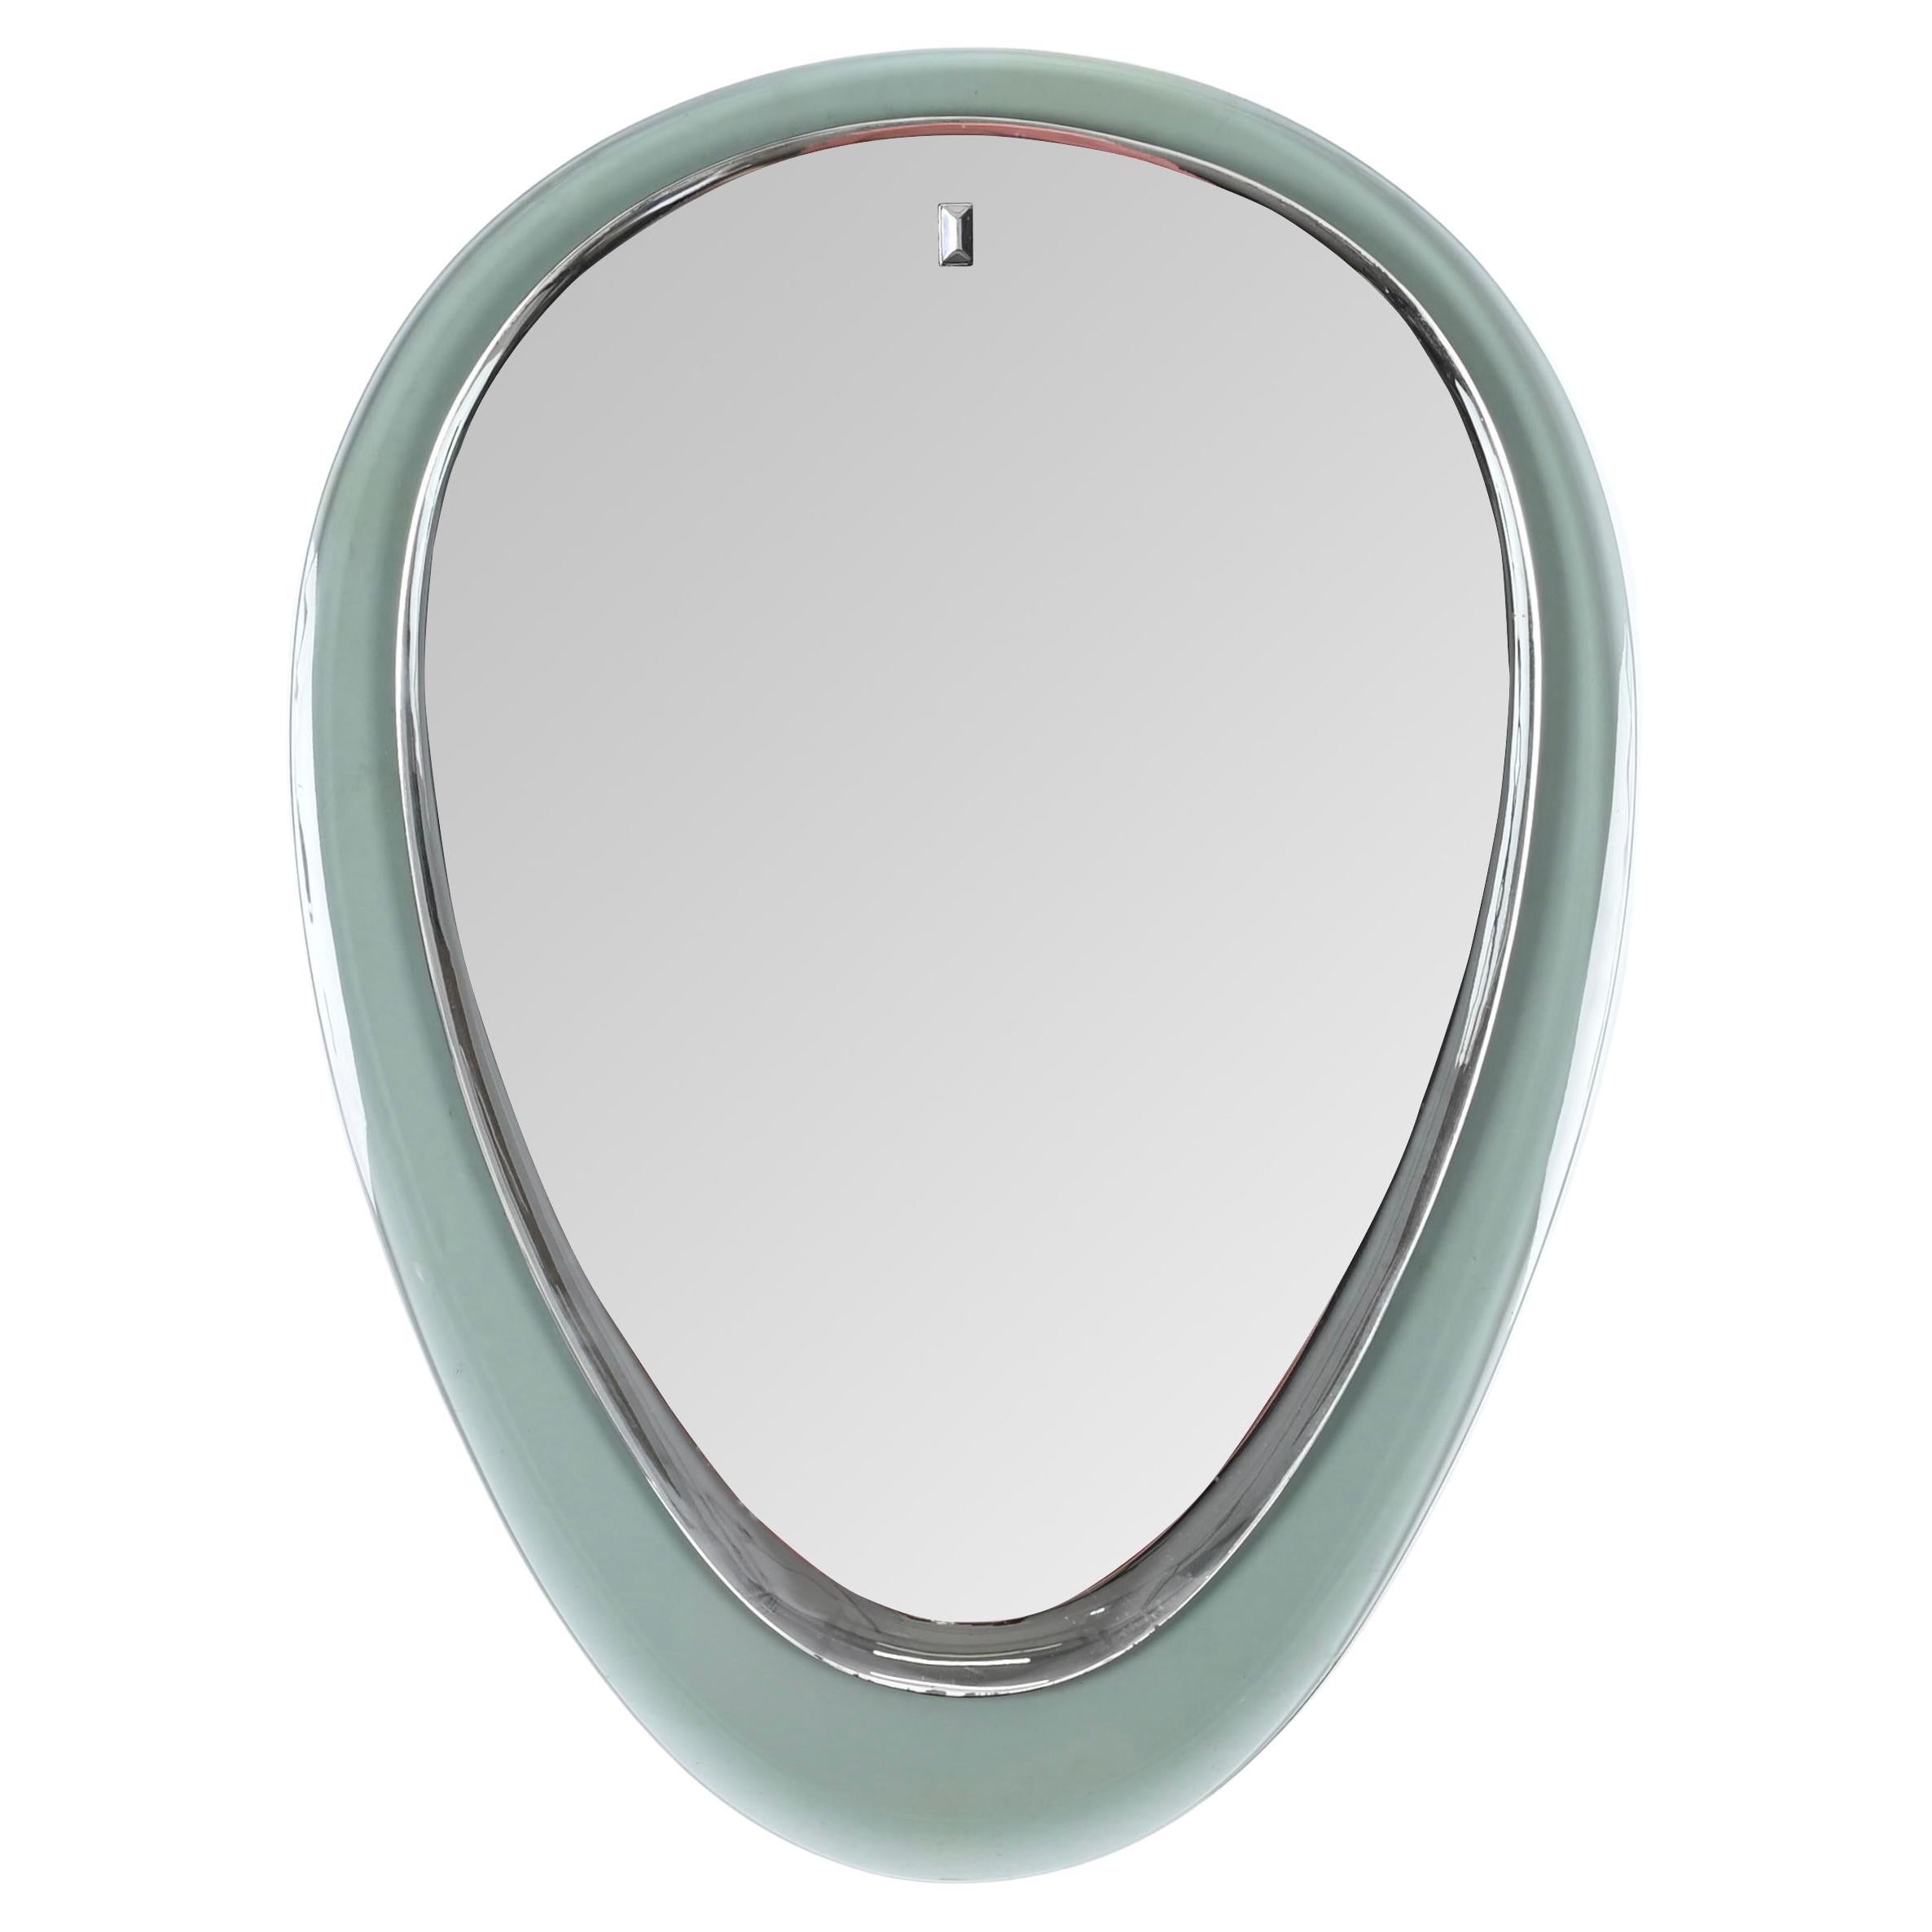 Cristal Art Green Aquamarine Beveled Oval Wall Mirror, Italy, 1950s For Sale